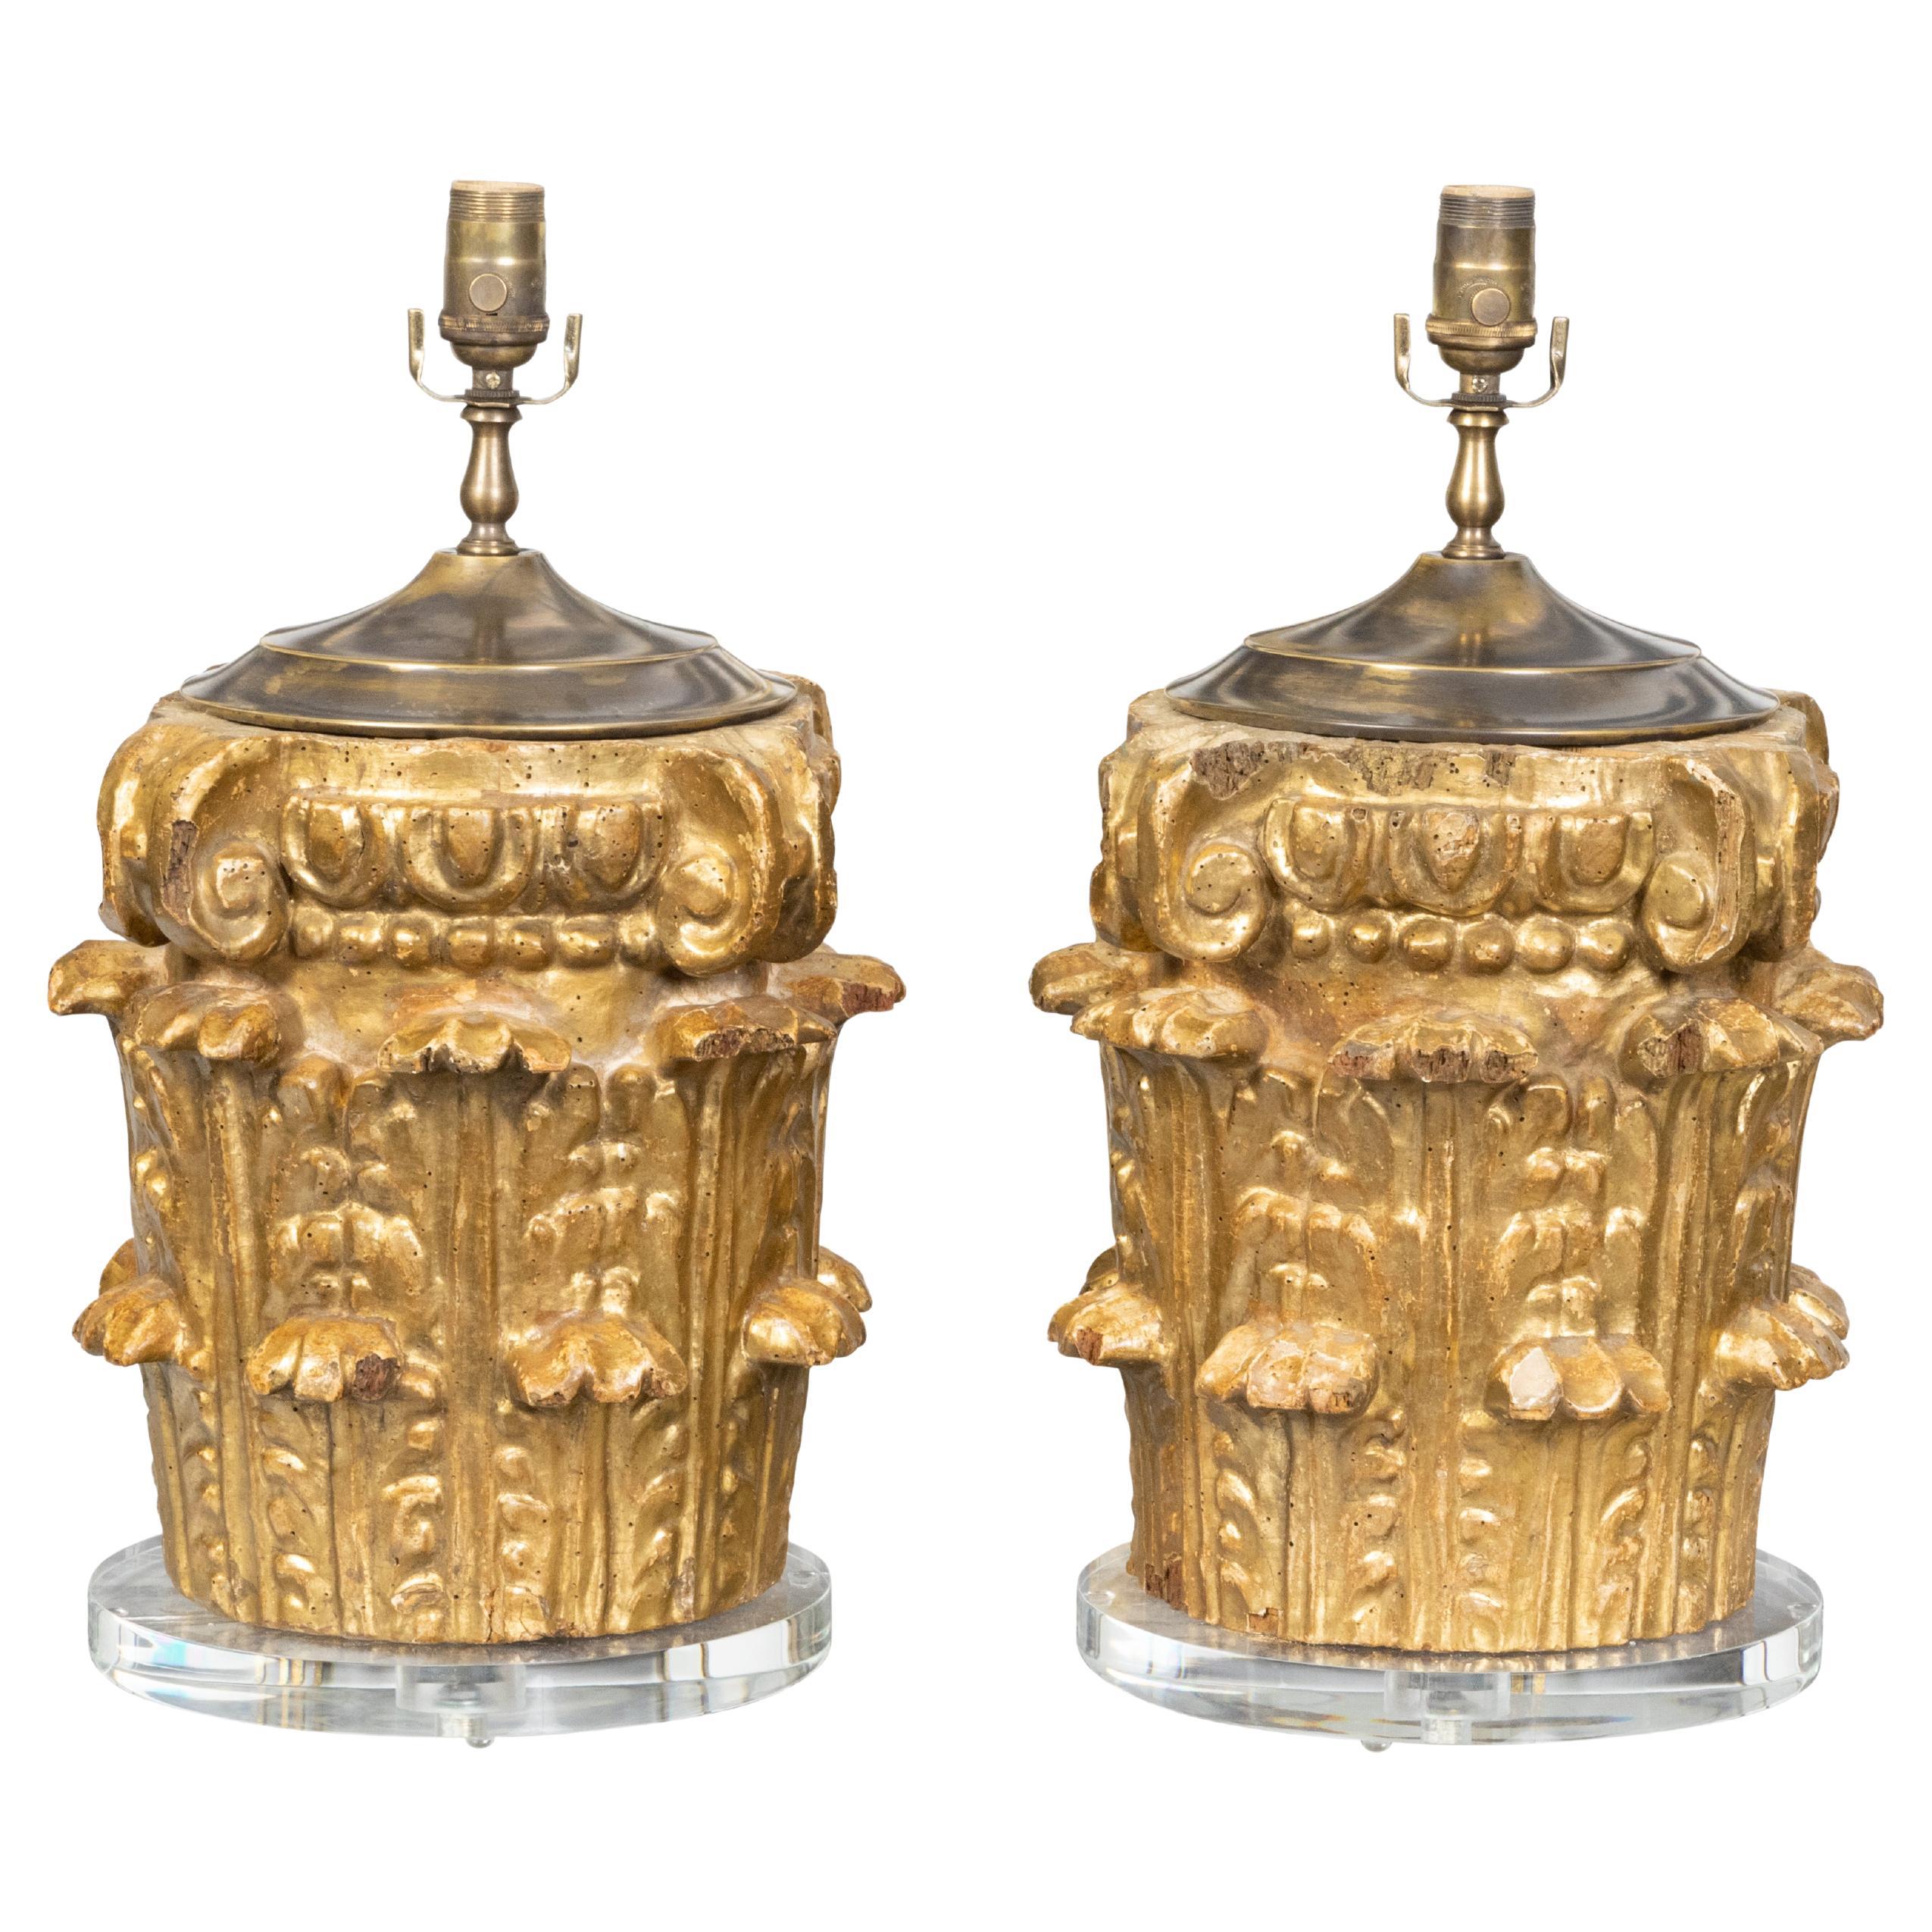 Italian 19th Century Carved Giltwood Composite Capitals Made into Table Lamps For Sale